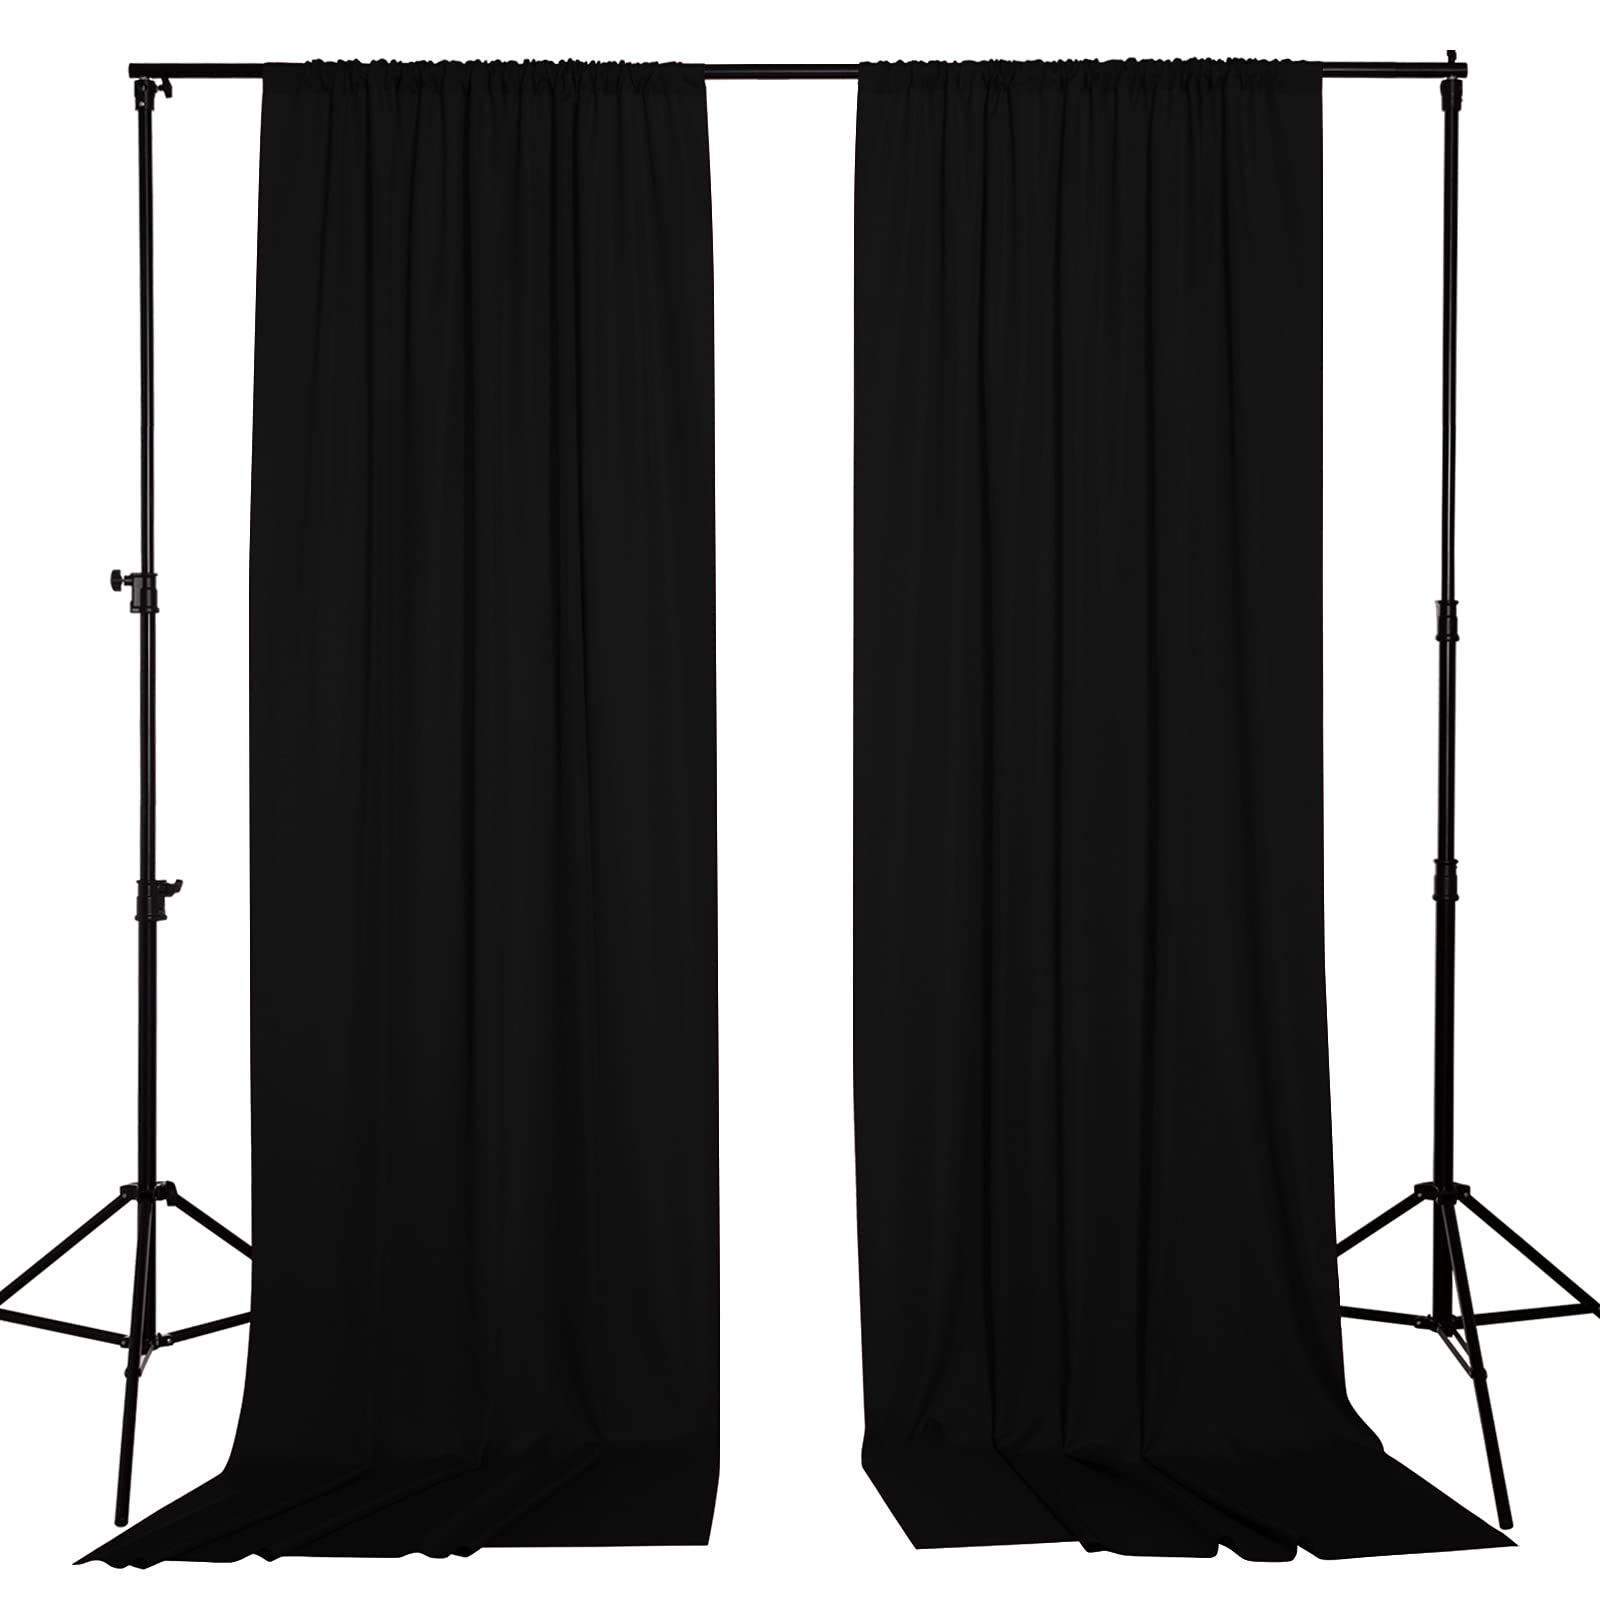 StangH Black Backdrop Curtains for Parties - 10 ft Curtain Drapes for Partition Room Dividers Curtains Waterproof Home Theater Studio Backgrounds Wedding Stage Stand Panels, 2 Panels